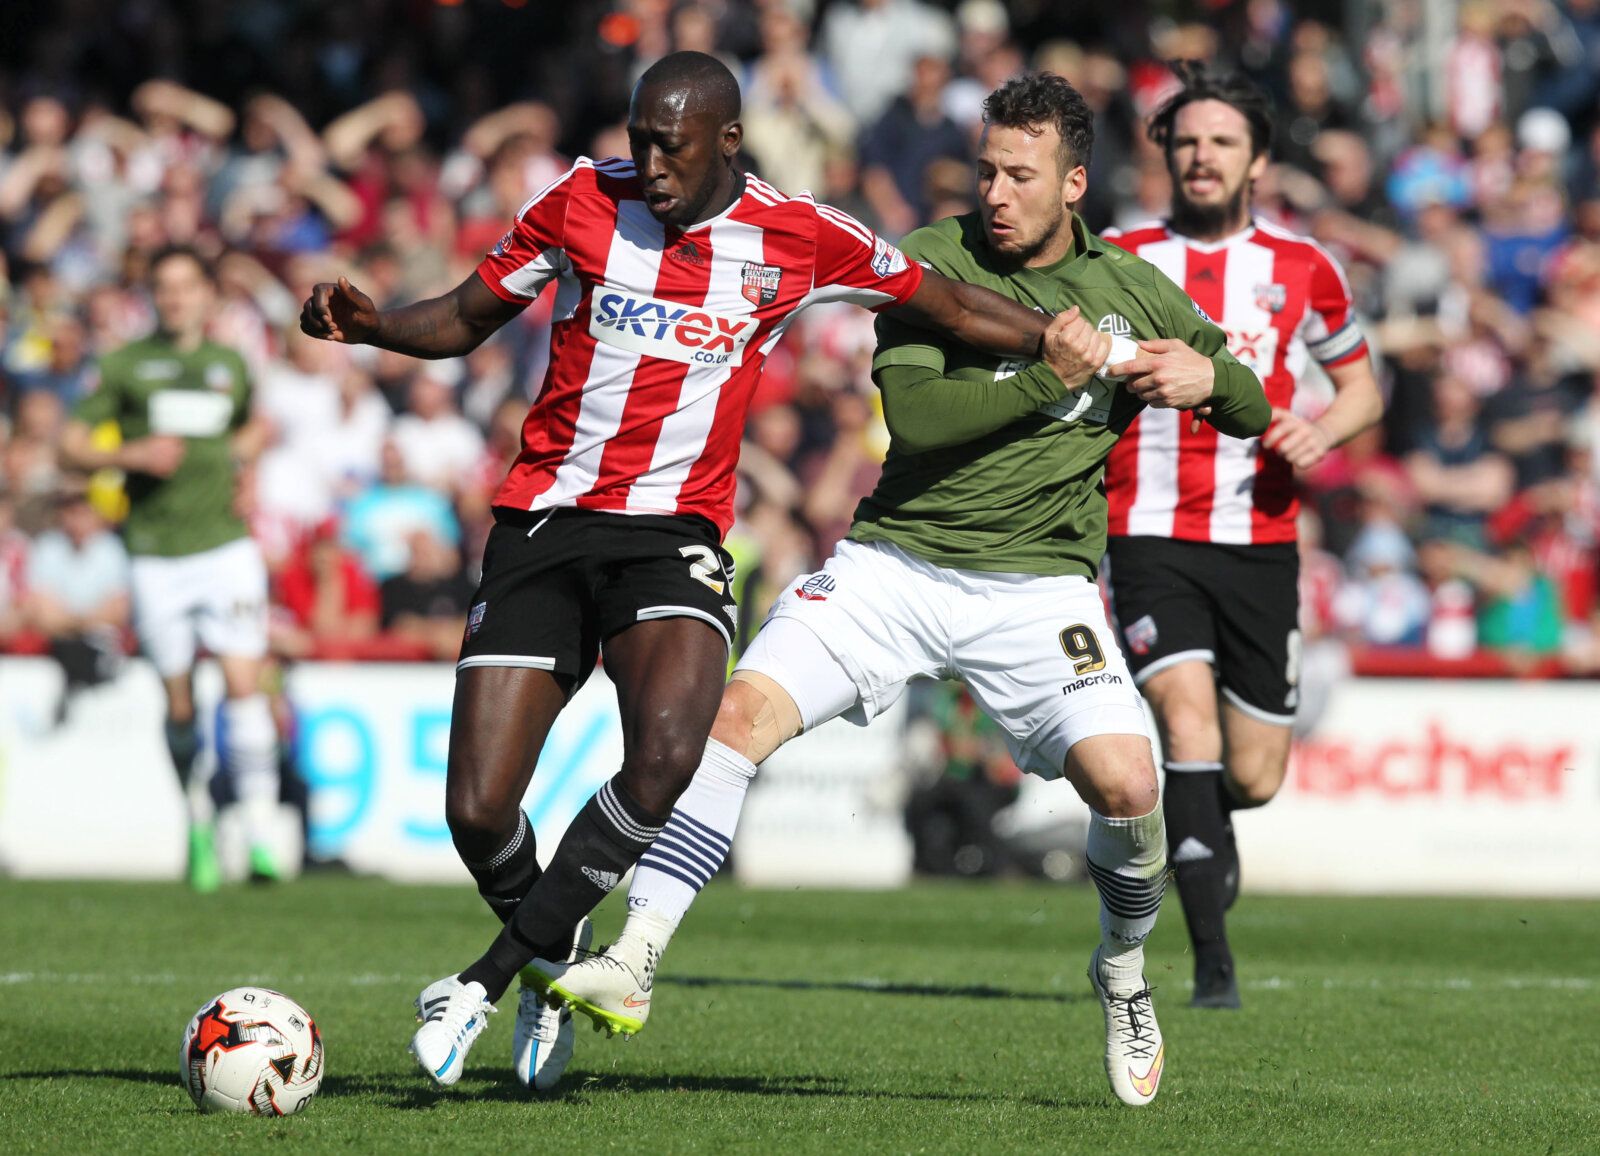 Football - Brentford v Bolton Wanderers - Sky Bet Football League Championship - Griffin Park - 18/4/15 
Bolton Wanderers' Adam Le Fondre in action with Brentford's Toumani Diagouraga 
Mandatory Credit: Action Images / Paul Redding 
Livepic 
EDITORIAL USE ONLY. No use with unauthorized audio, video, data, fixture lists, club/league logos or 